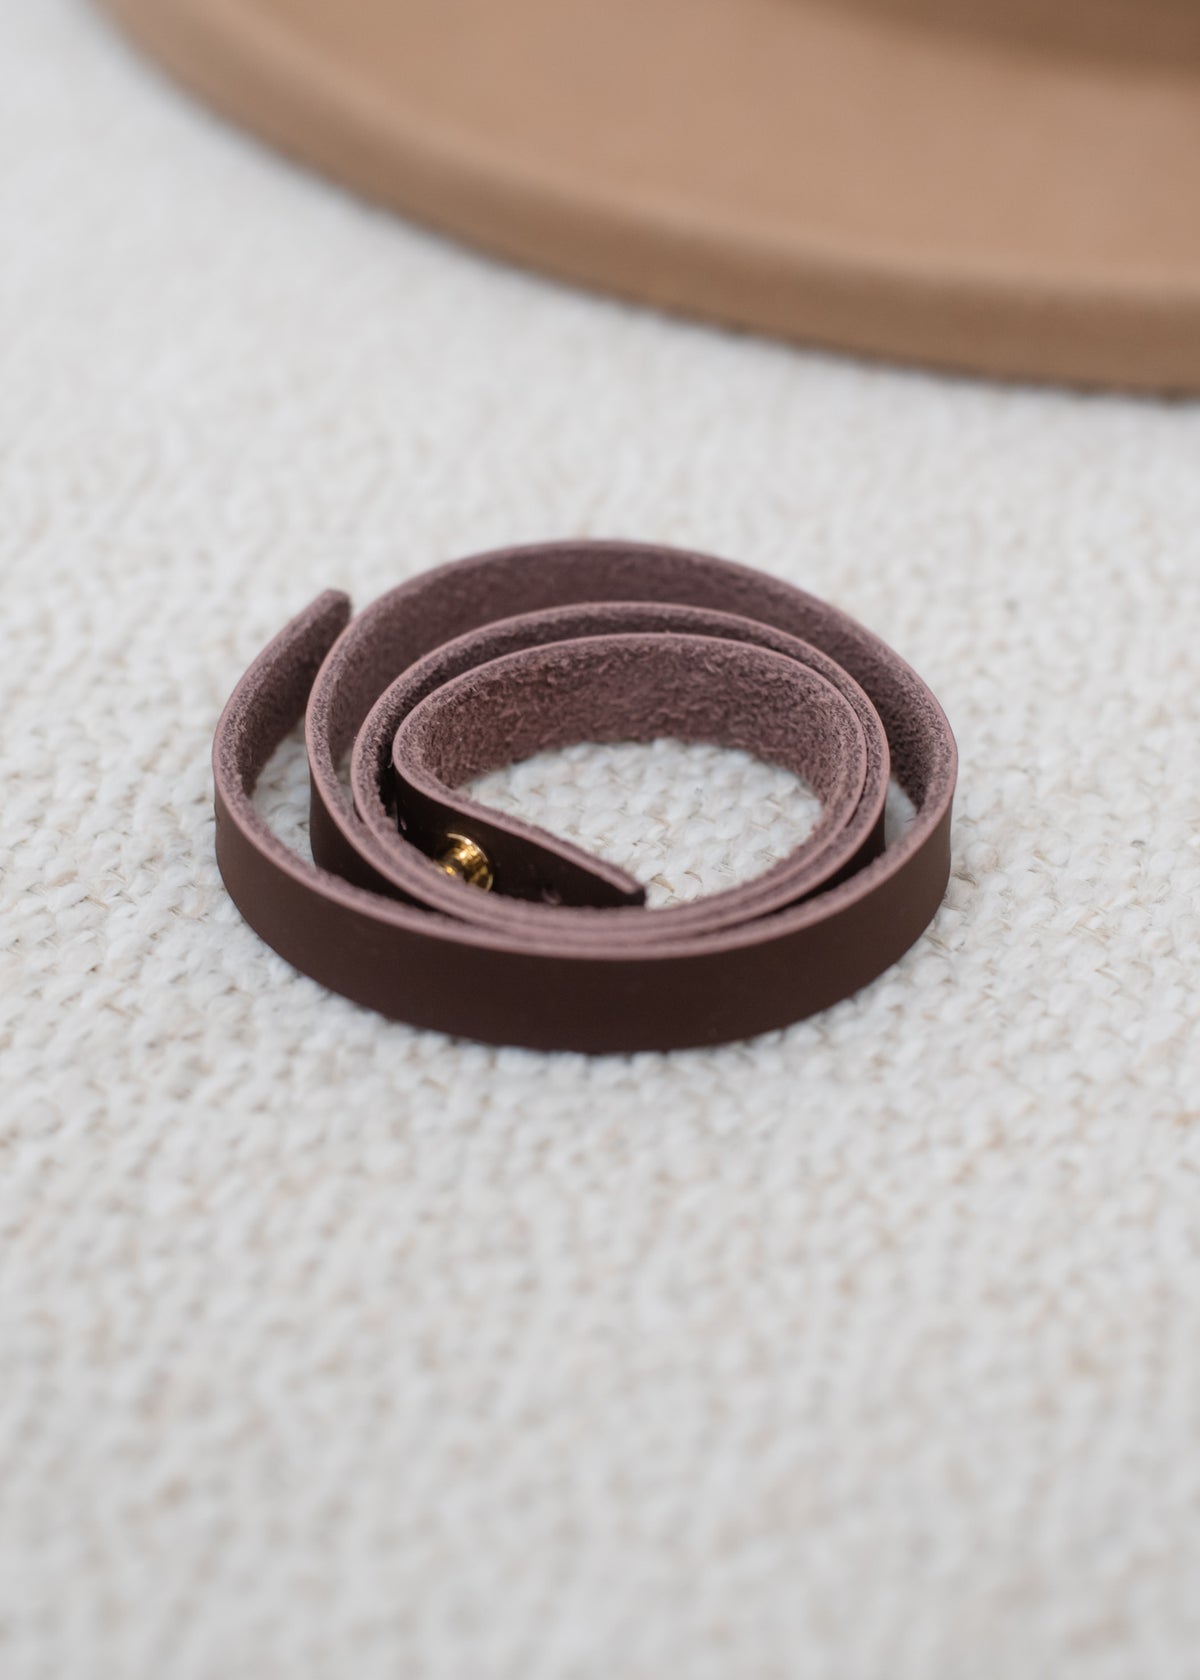 The Thin Removable Leather Band: Pin